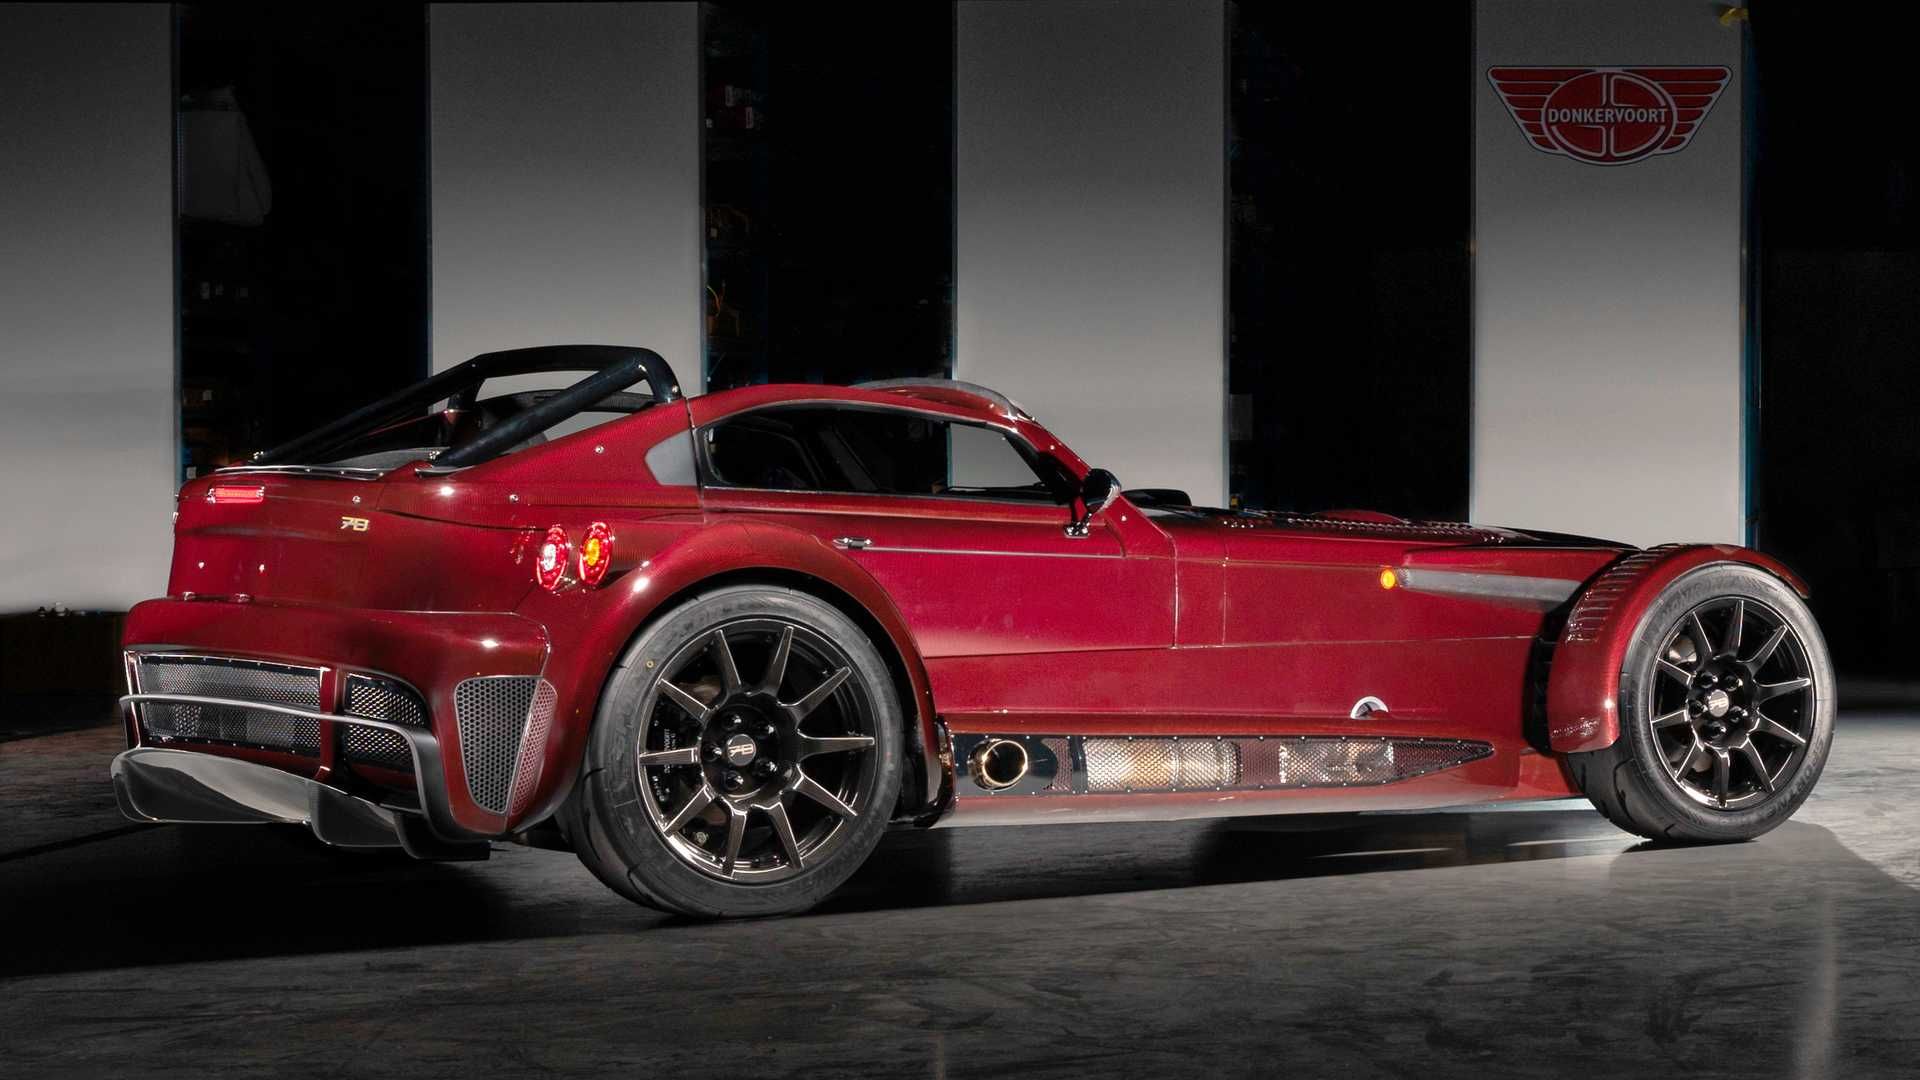 2021 Donkervoort D8 GTO-JD70 Bare Naked Carbon Edition